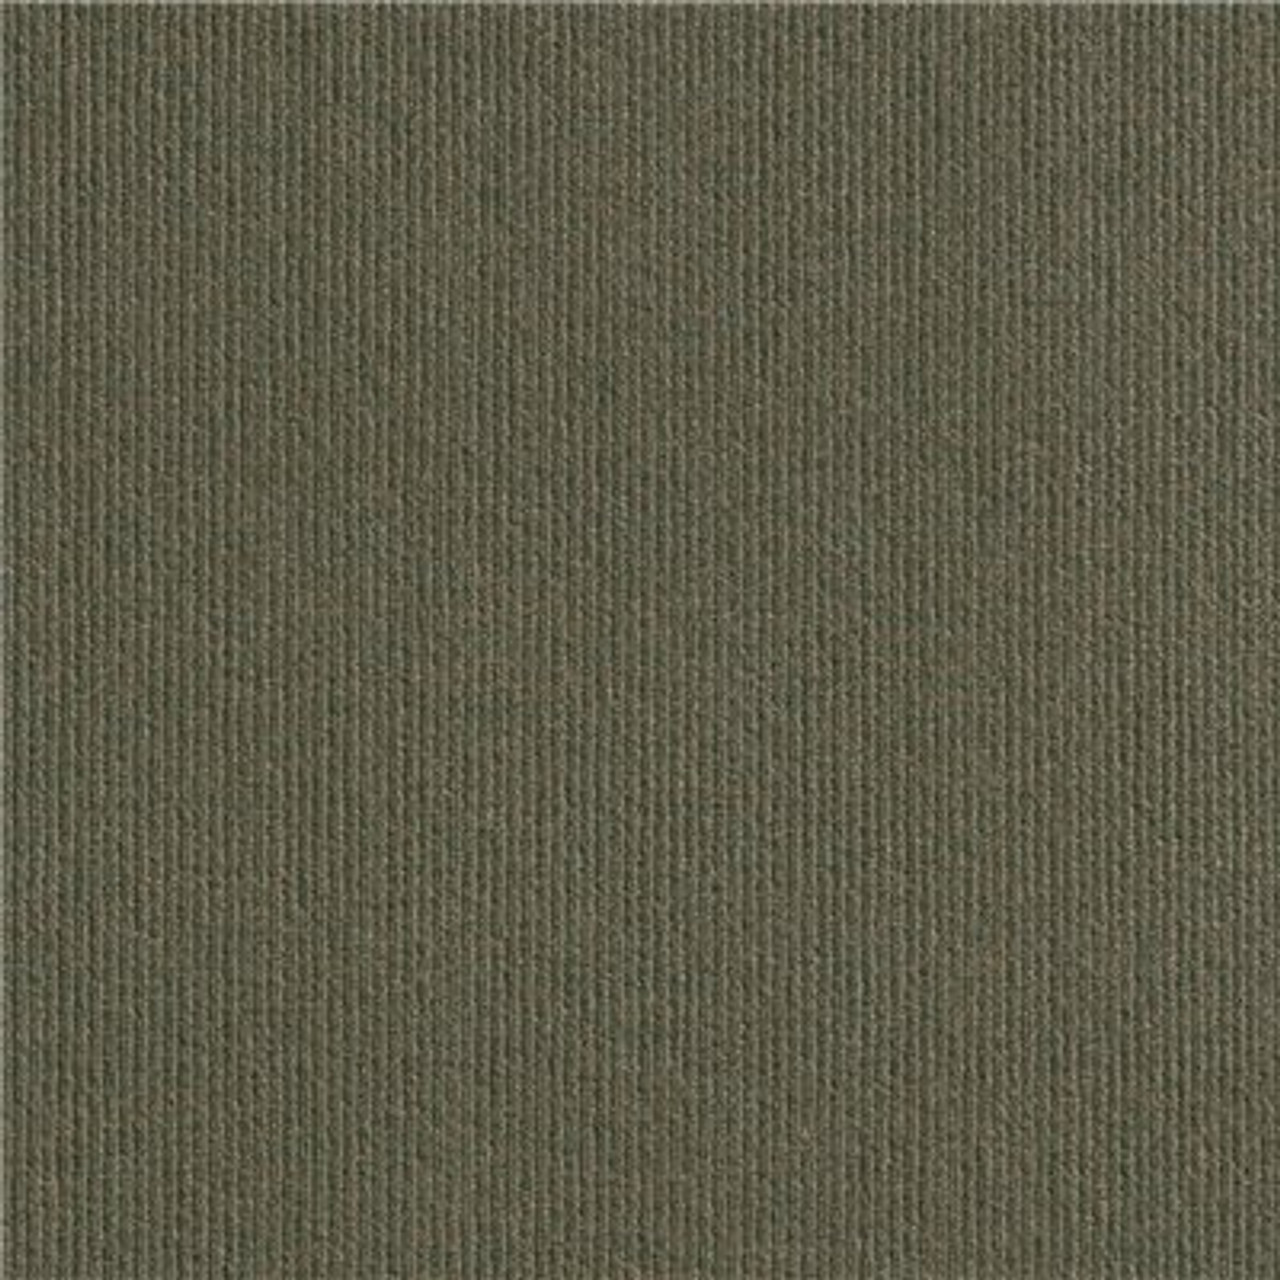 Foss Peel And Stick First Impressions High Low Rib Olive Texture 24 In. X 24 In. Commercial Carpet Tile (15 Tiles/Case)